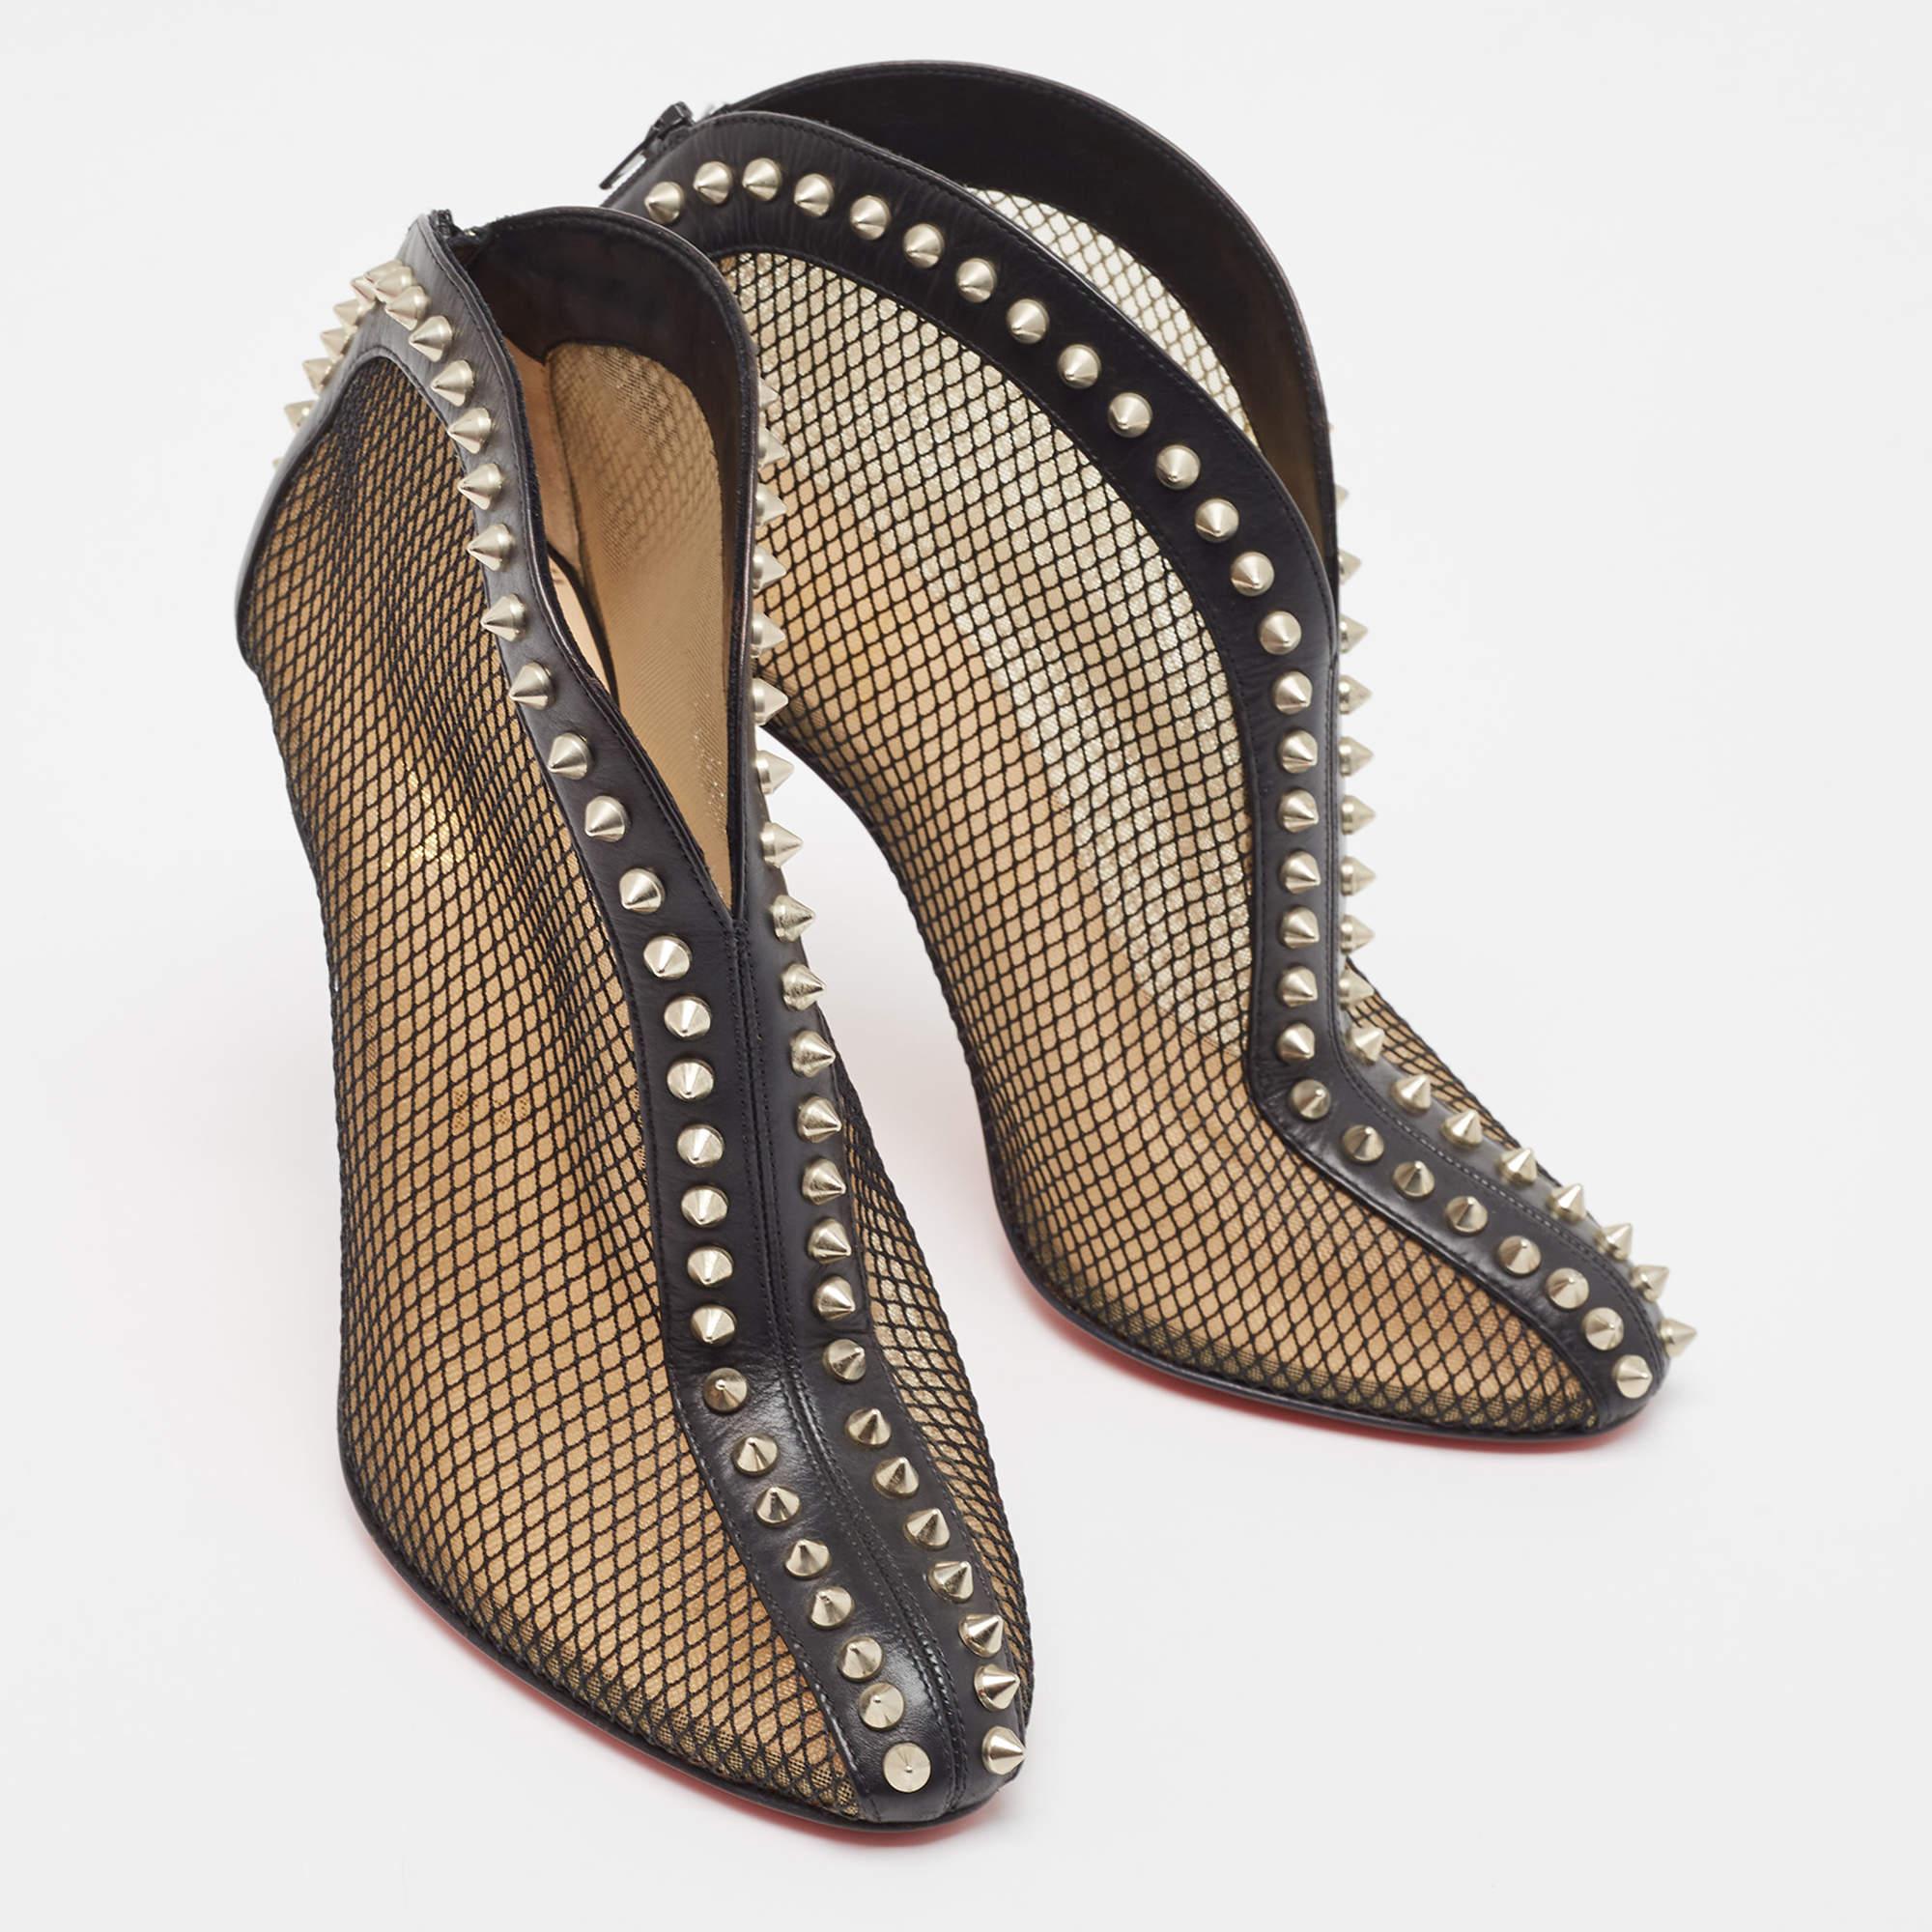 Christian Louboutin Black Mesh and Leather Bourriche Ankle Booties Size 38.5 In Good Condition For Sale In Dubai, Al Qouz 2